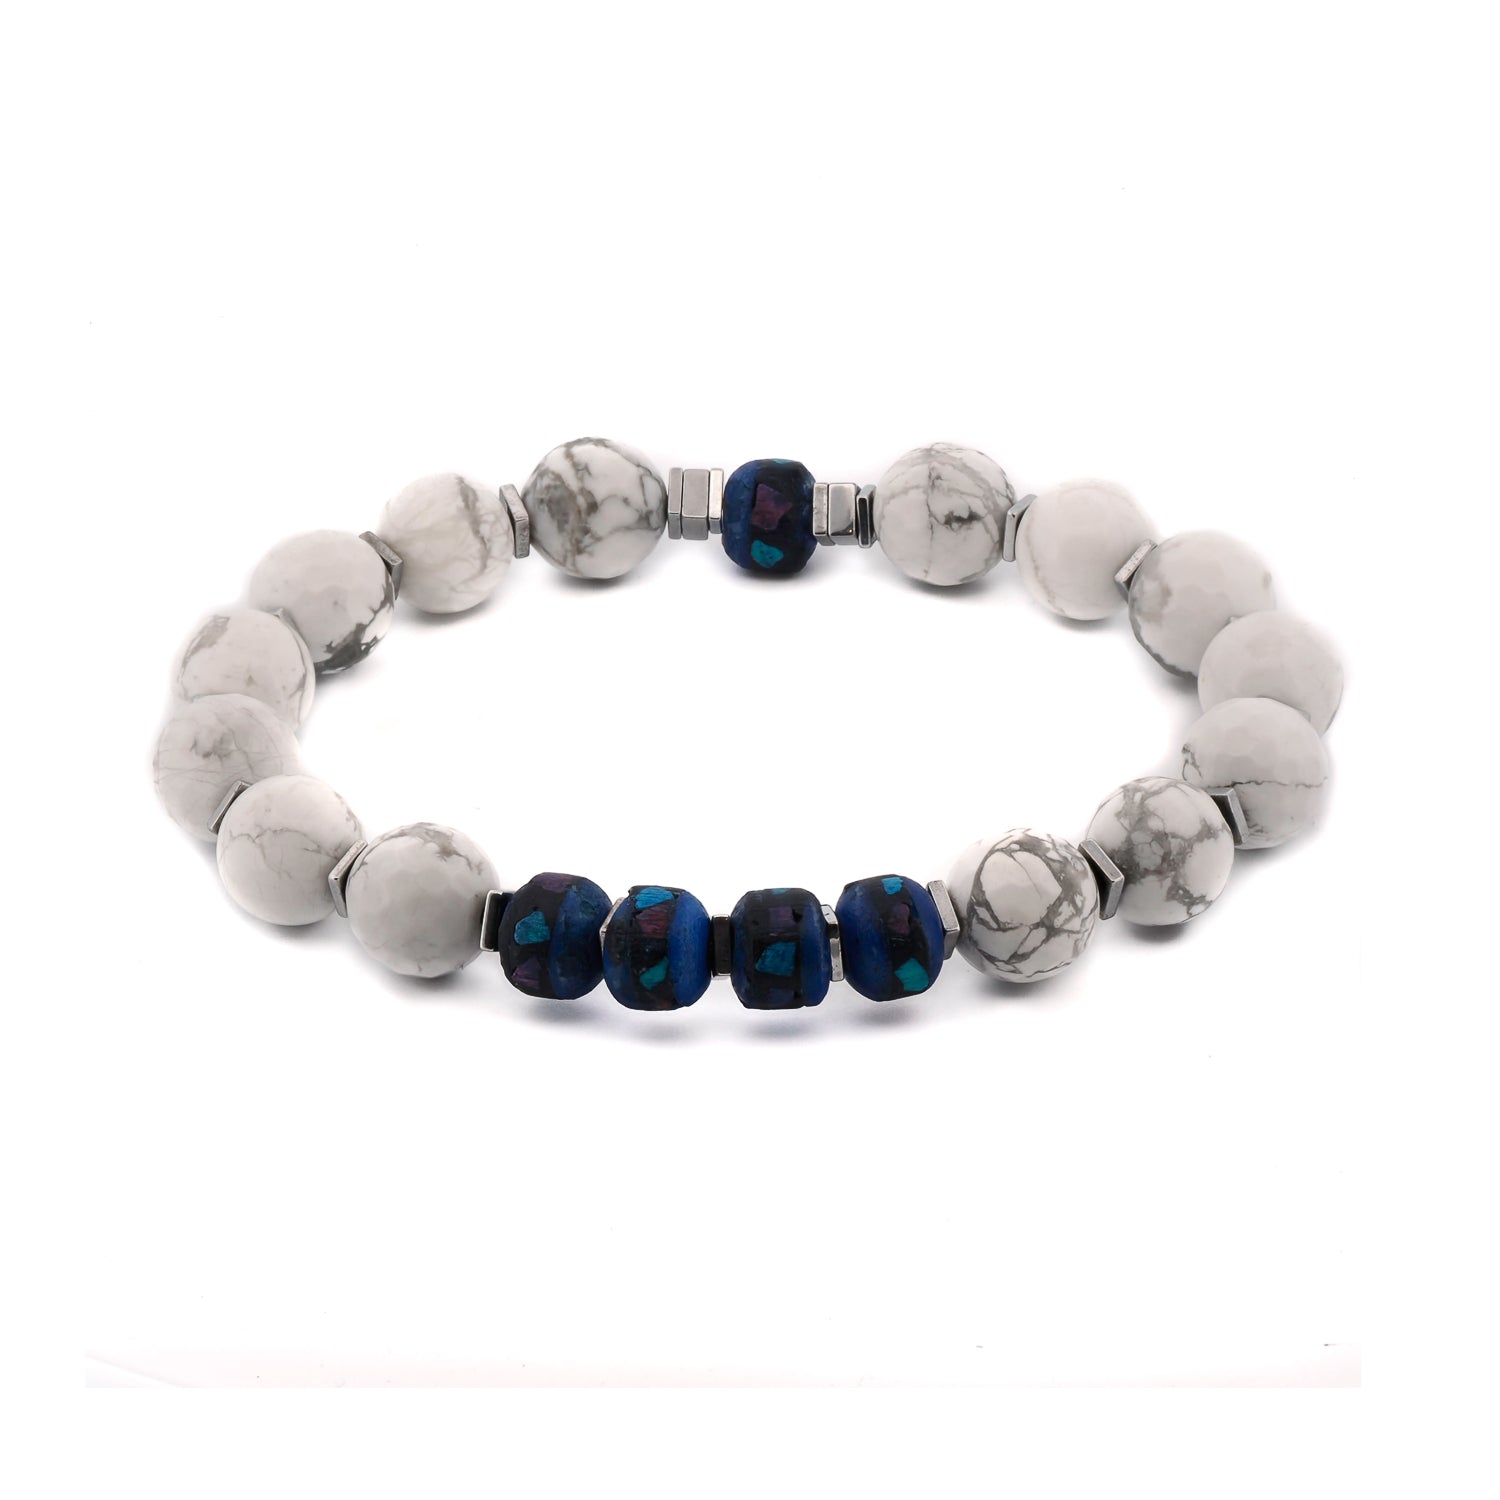 Spiritual Beaded White & Blue Energy Bracelet featuring 10mm white howlite stone beads, known for their calming properties, and vibrant blue Nepal beads